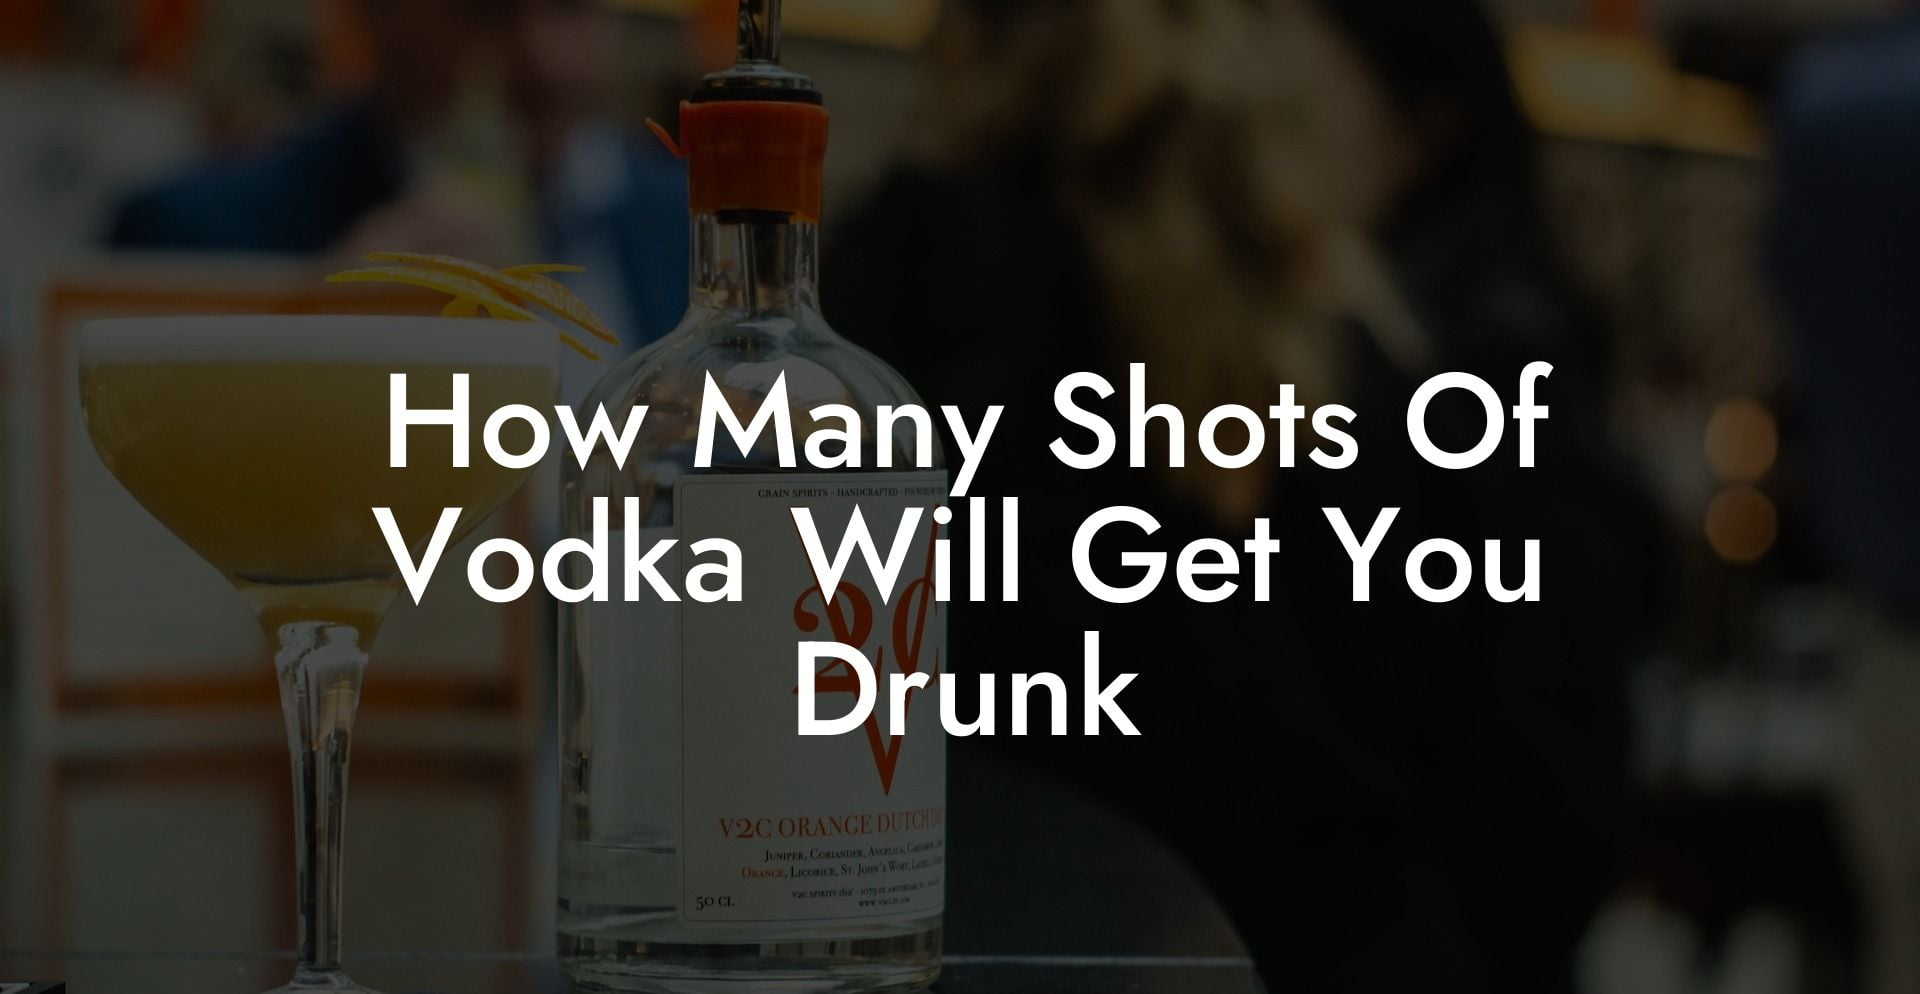 How Many Shots Of Vodka Will Get You Drunk